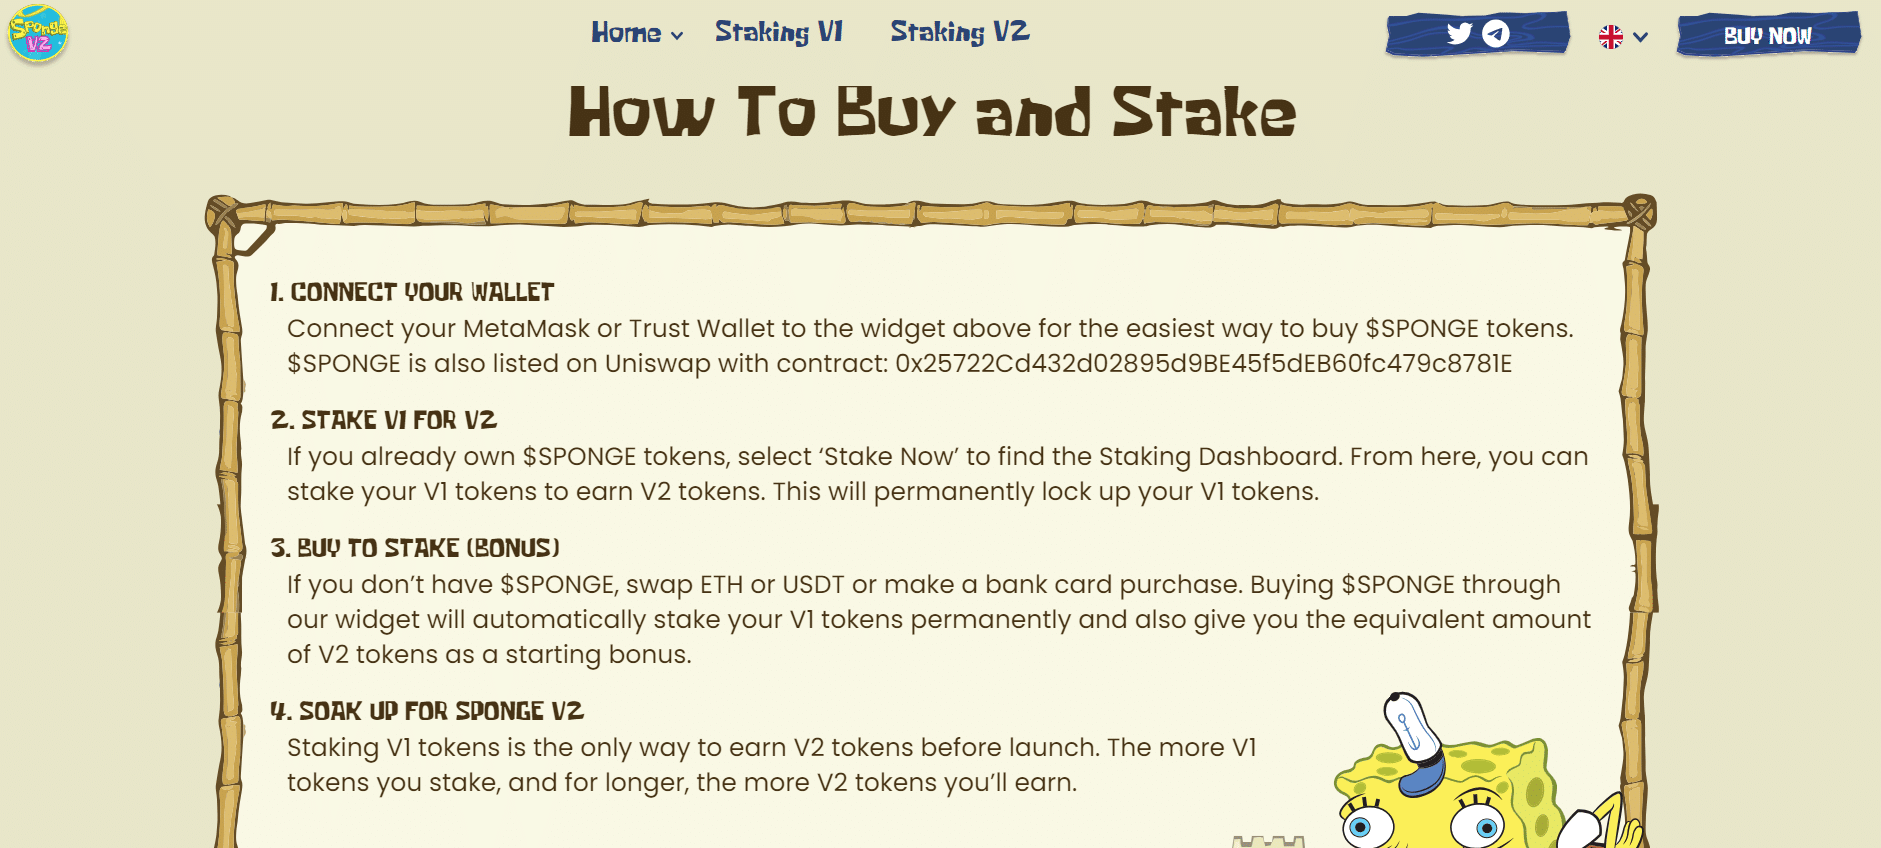 How to stake